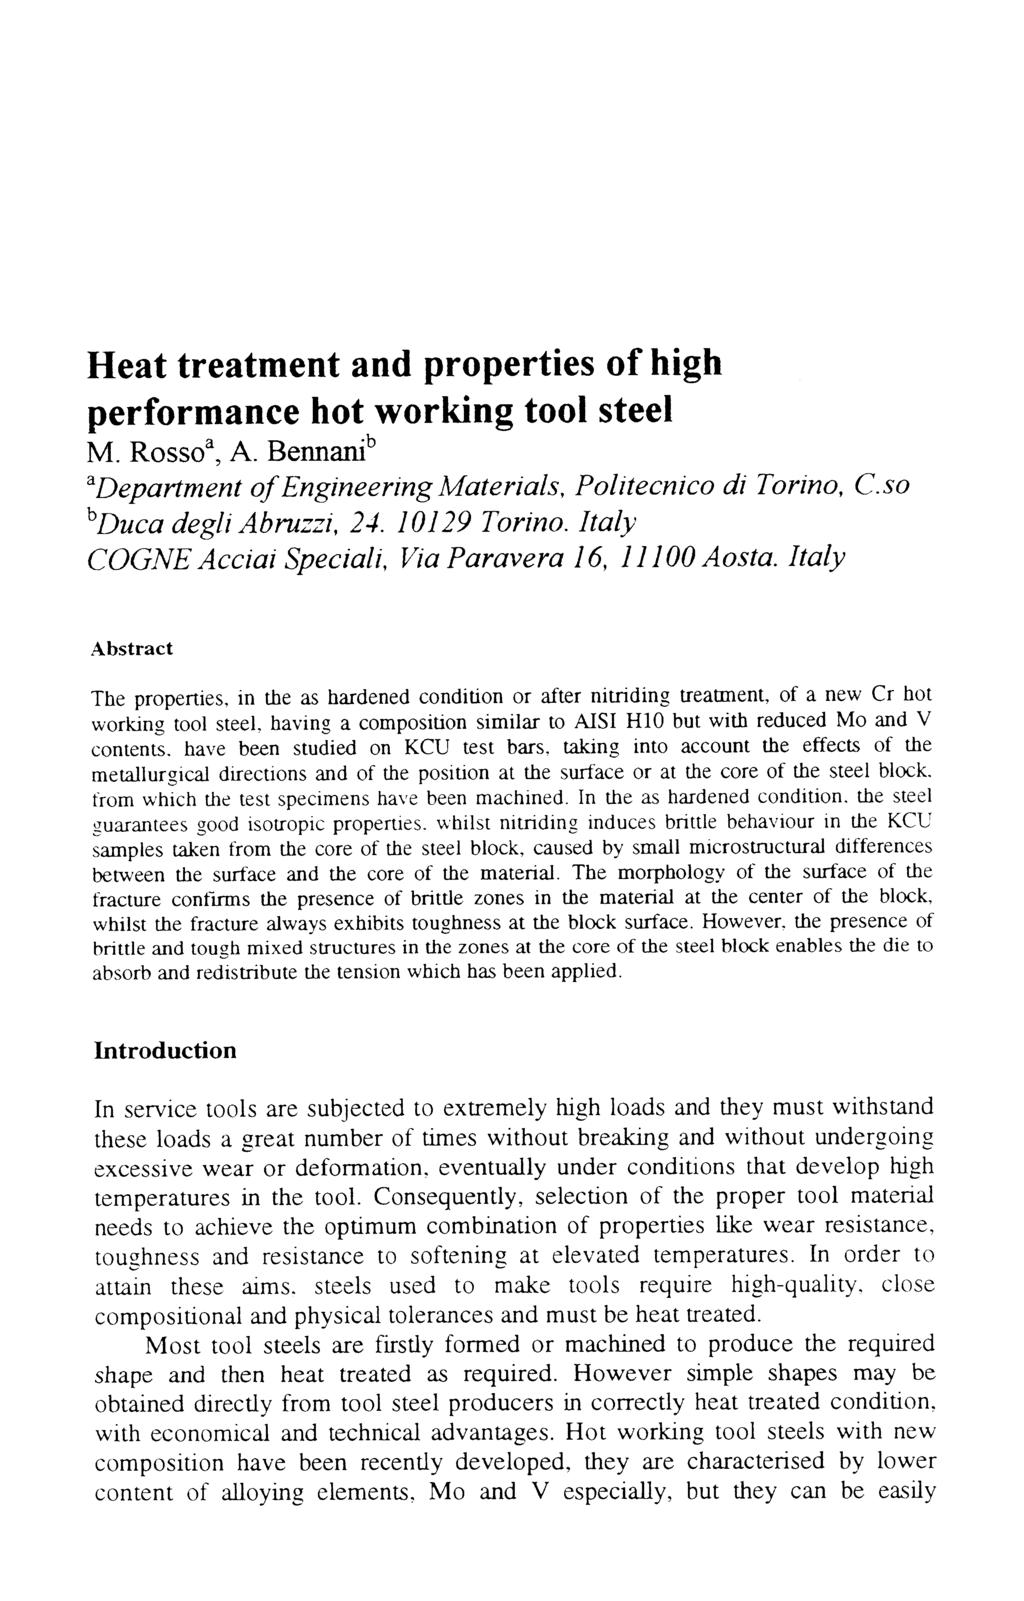 Heat treatment and properties of high performance hot working tool steel M. Rosso", A. Bennani^ * Department of Engineering Materials, Politecnico di Torino, C.so *Duca degli Abruzzi, 24.